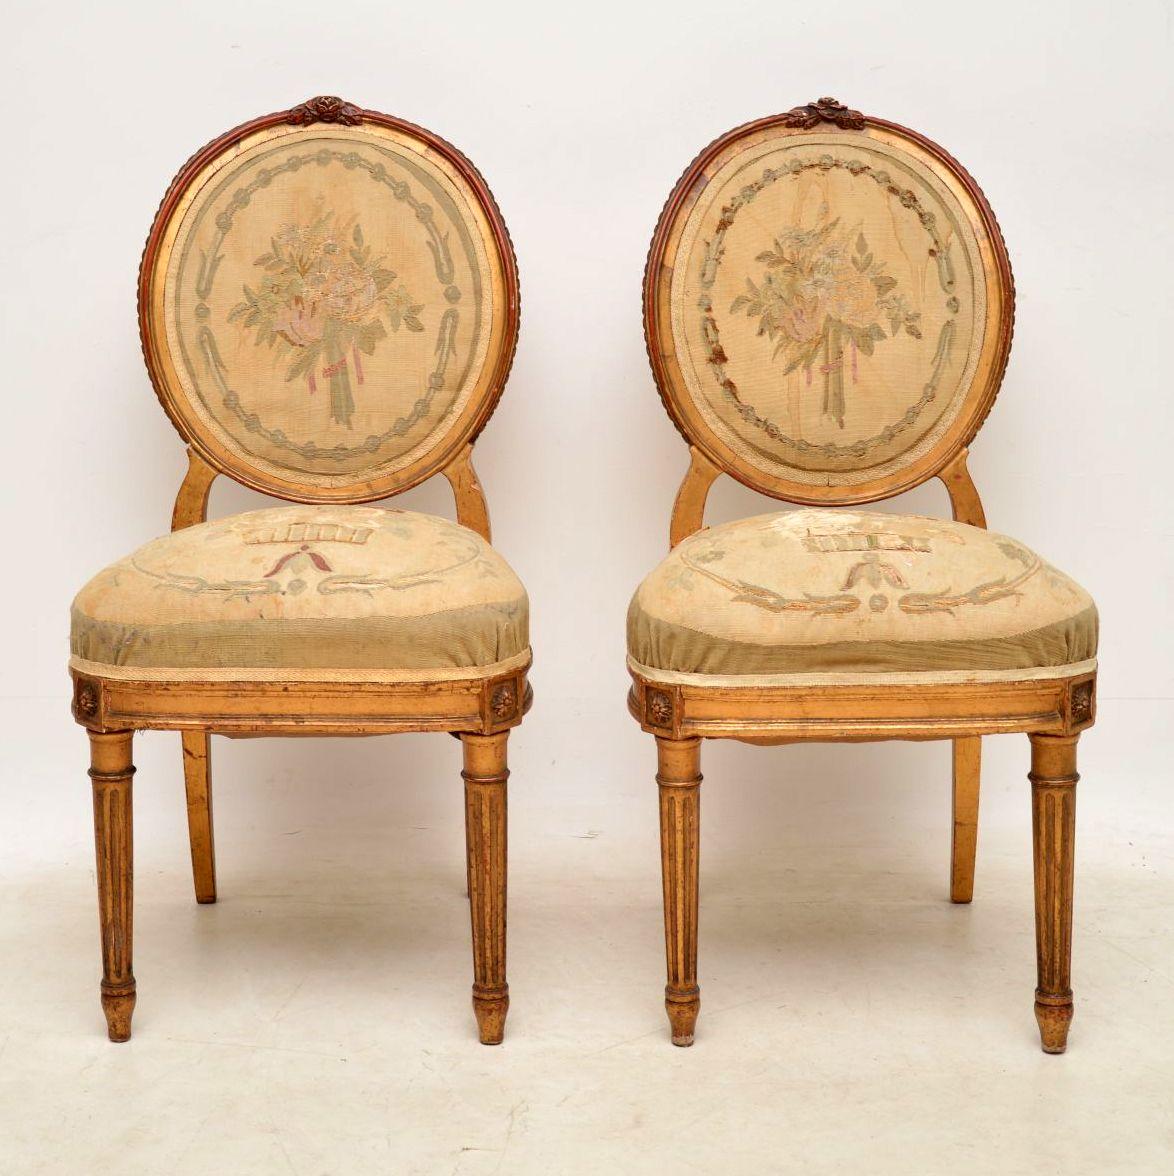 This pair of antique French giltwood side chairs are in great shape, besides the original upholstery. They are part of a whole set being sold on this site, including a sofa and matching pair of salons. There is an image of the complete set below and